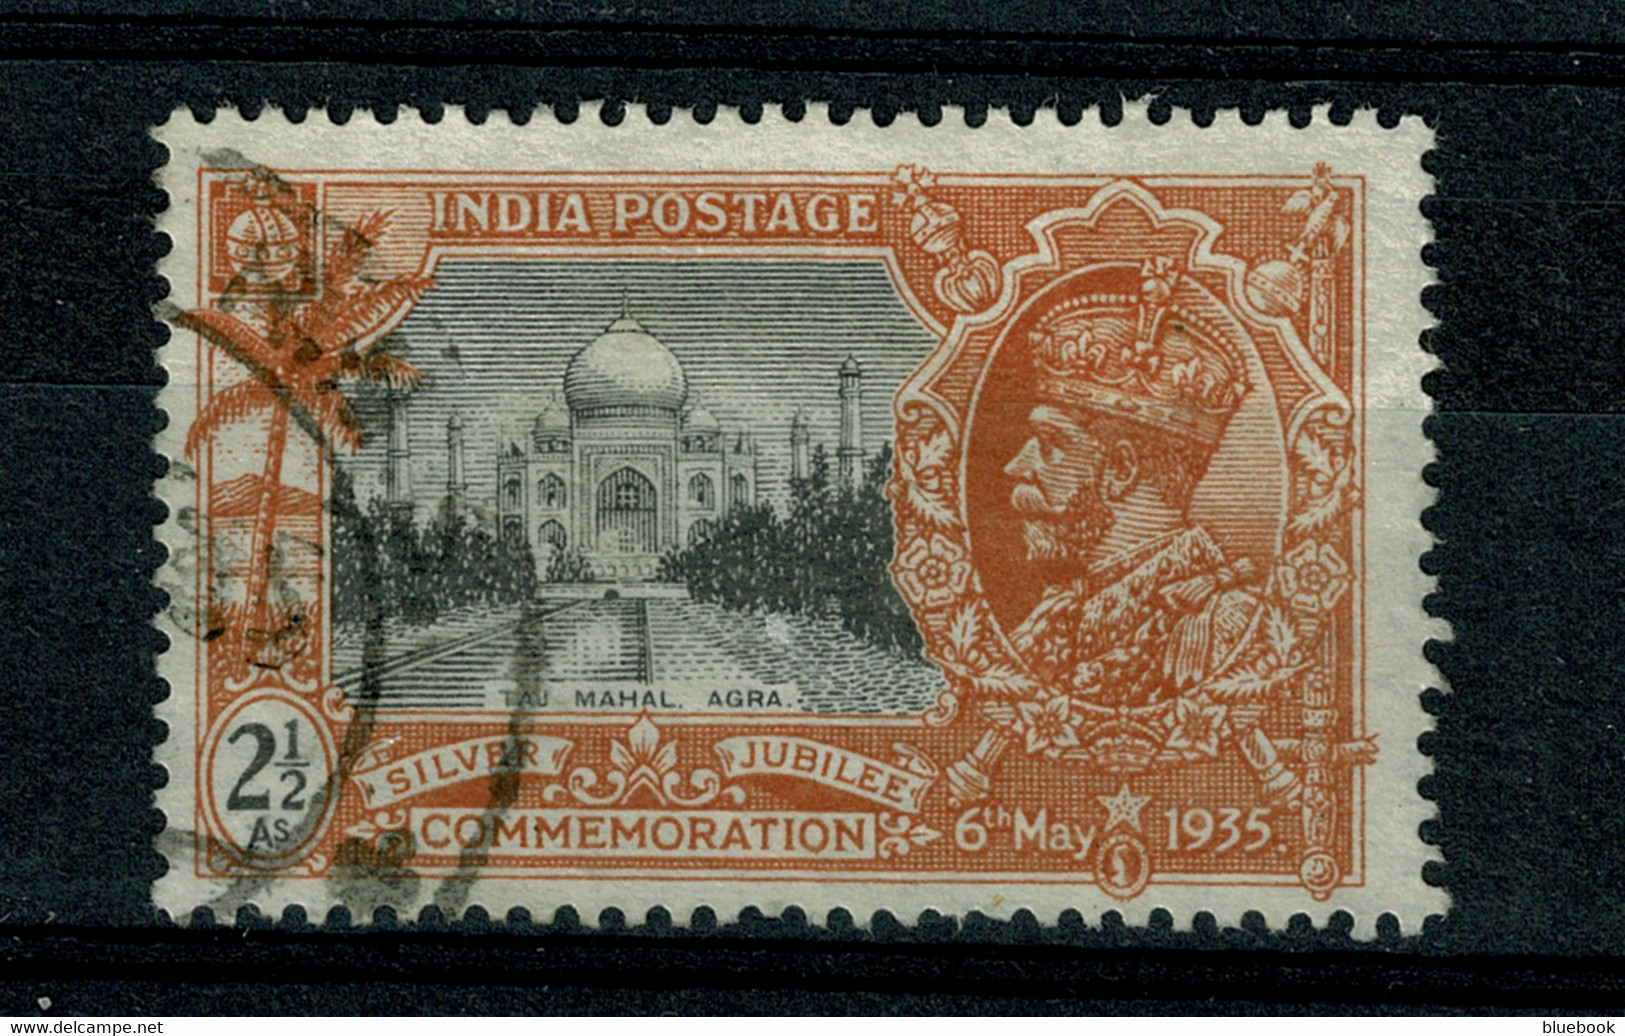 Ref 1458 - India - 1935 2 1/2 Annas KGV Silver Jubilee Used Stamp - SG 244 - 1911-35 King George V